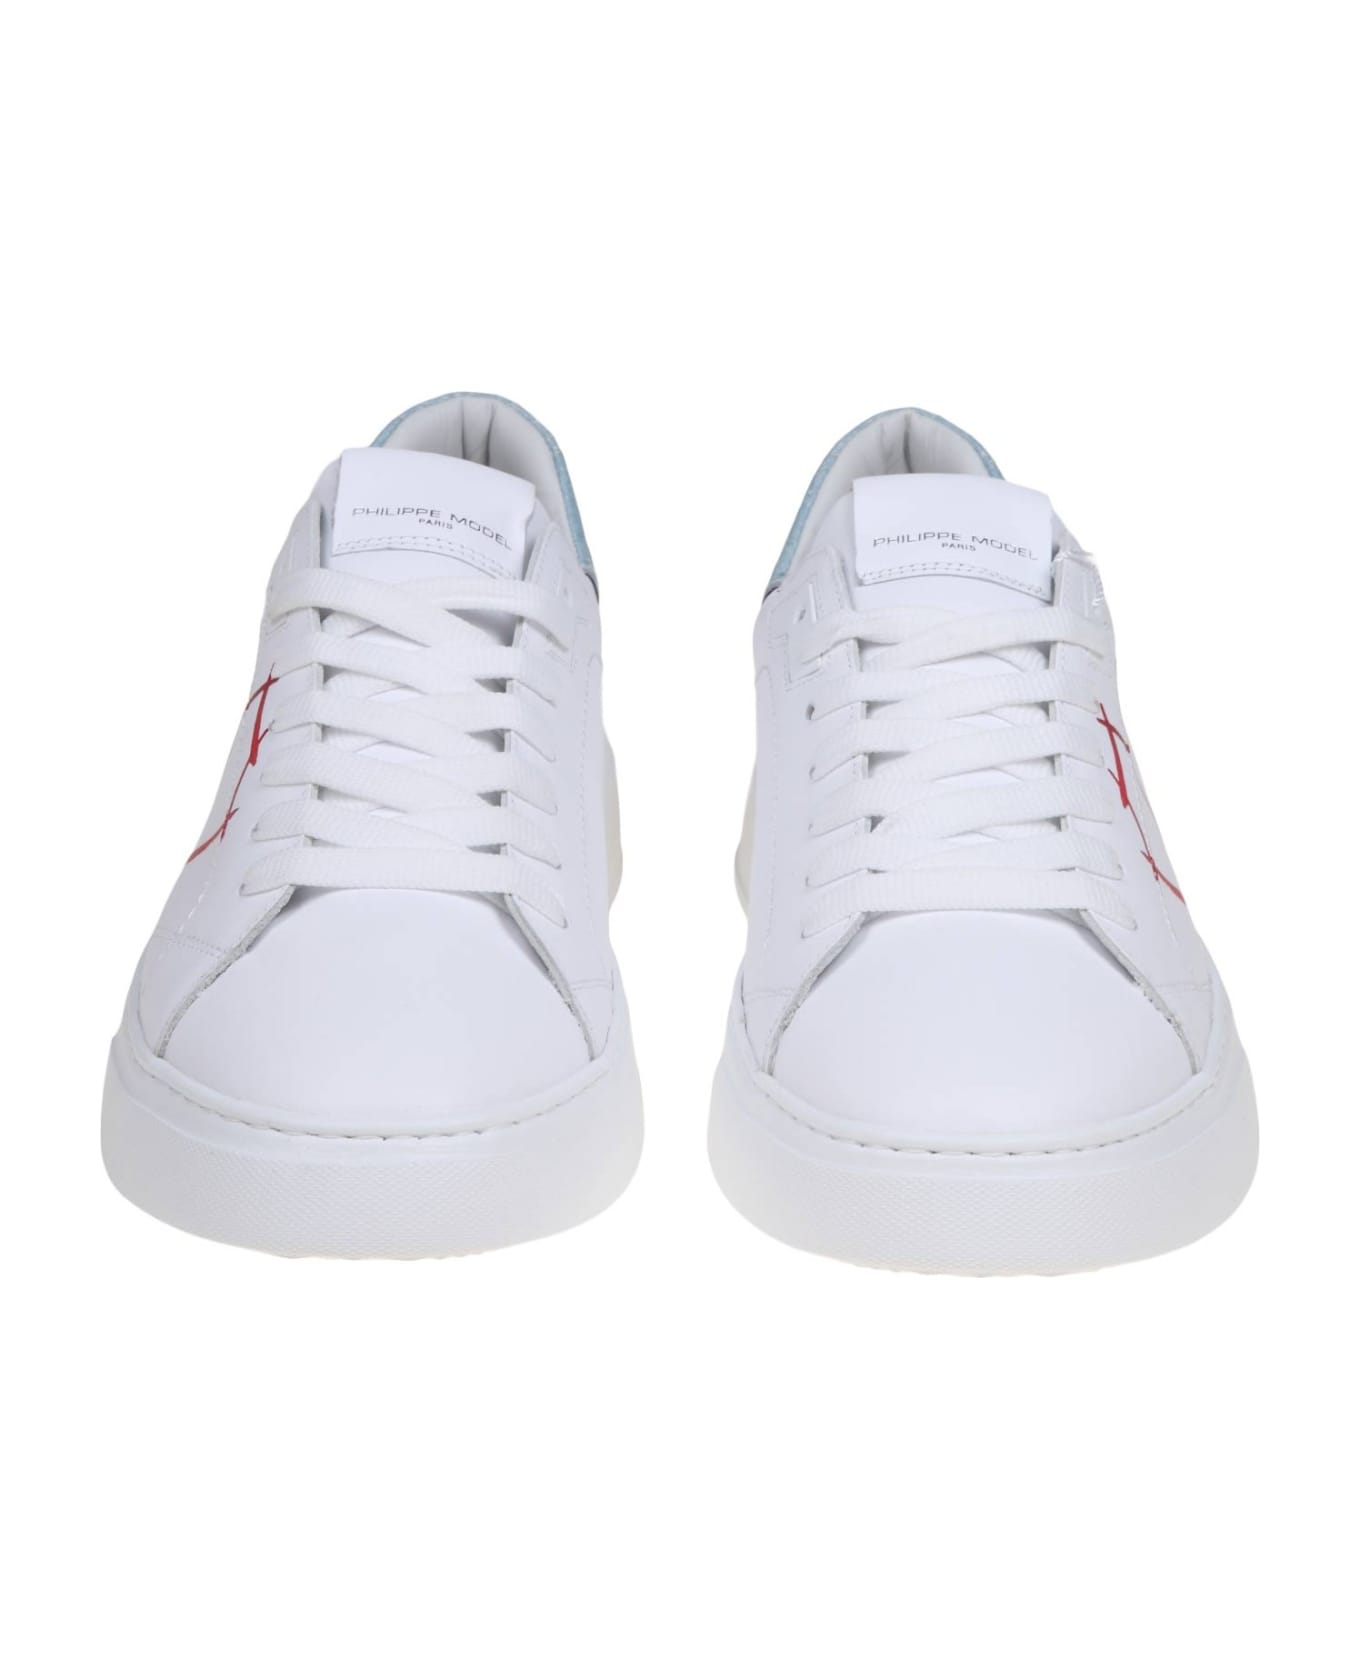 Philippe Model Temple Low Sneakers In White And Light Blue Leather - White/Red